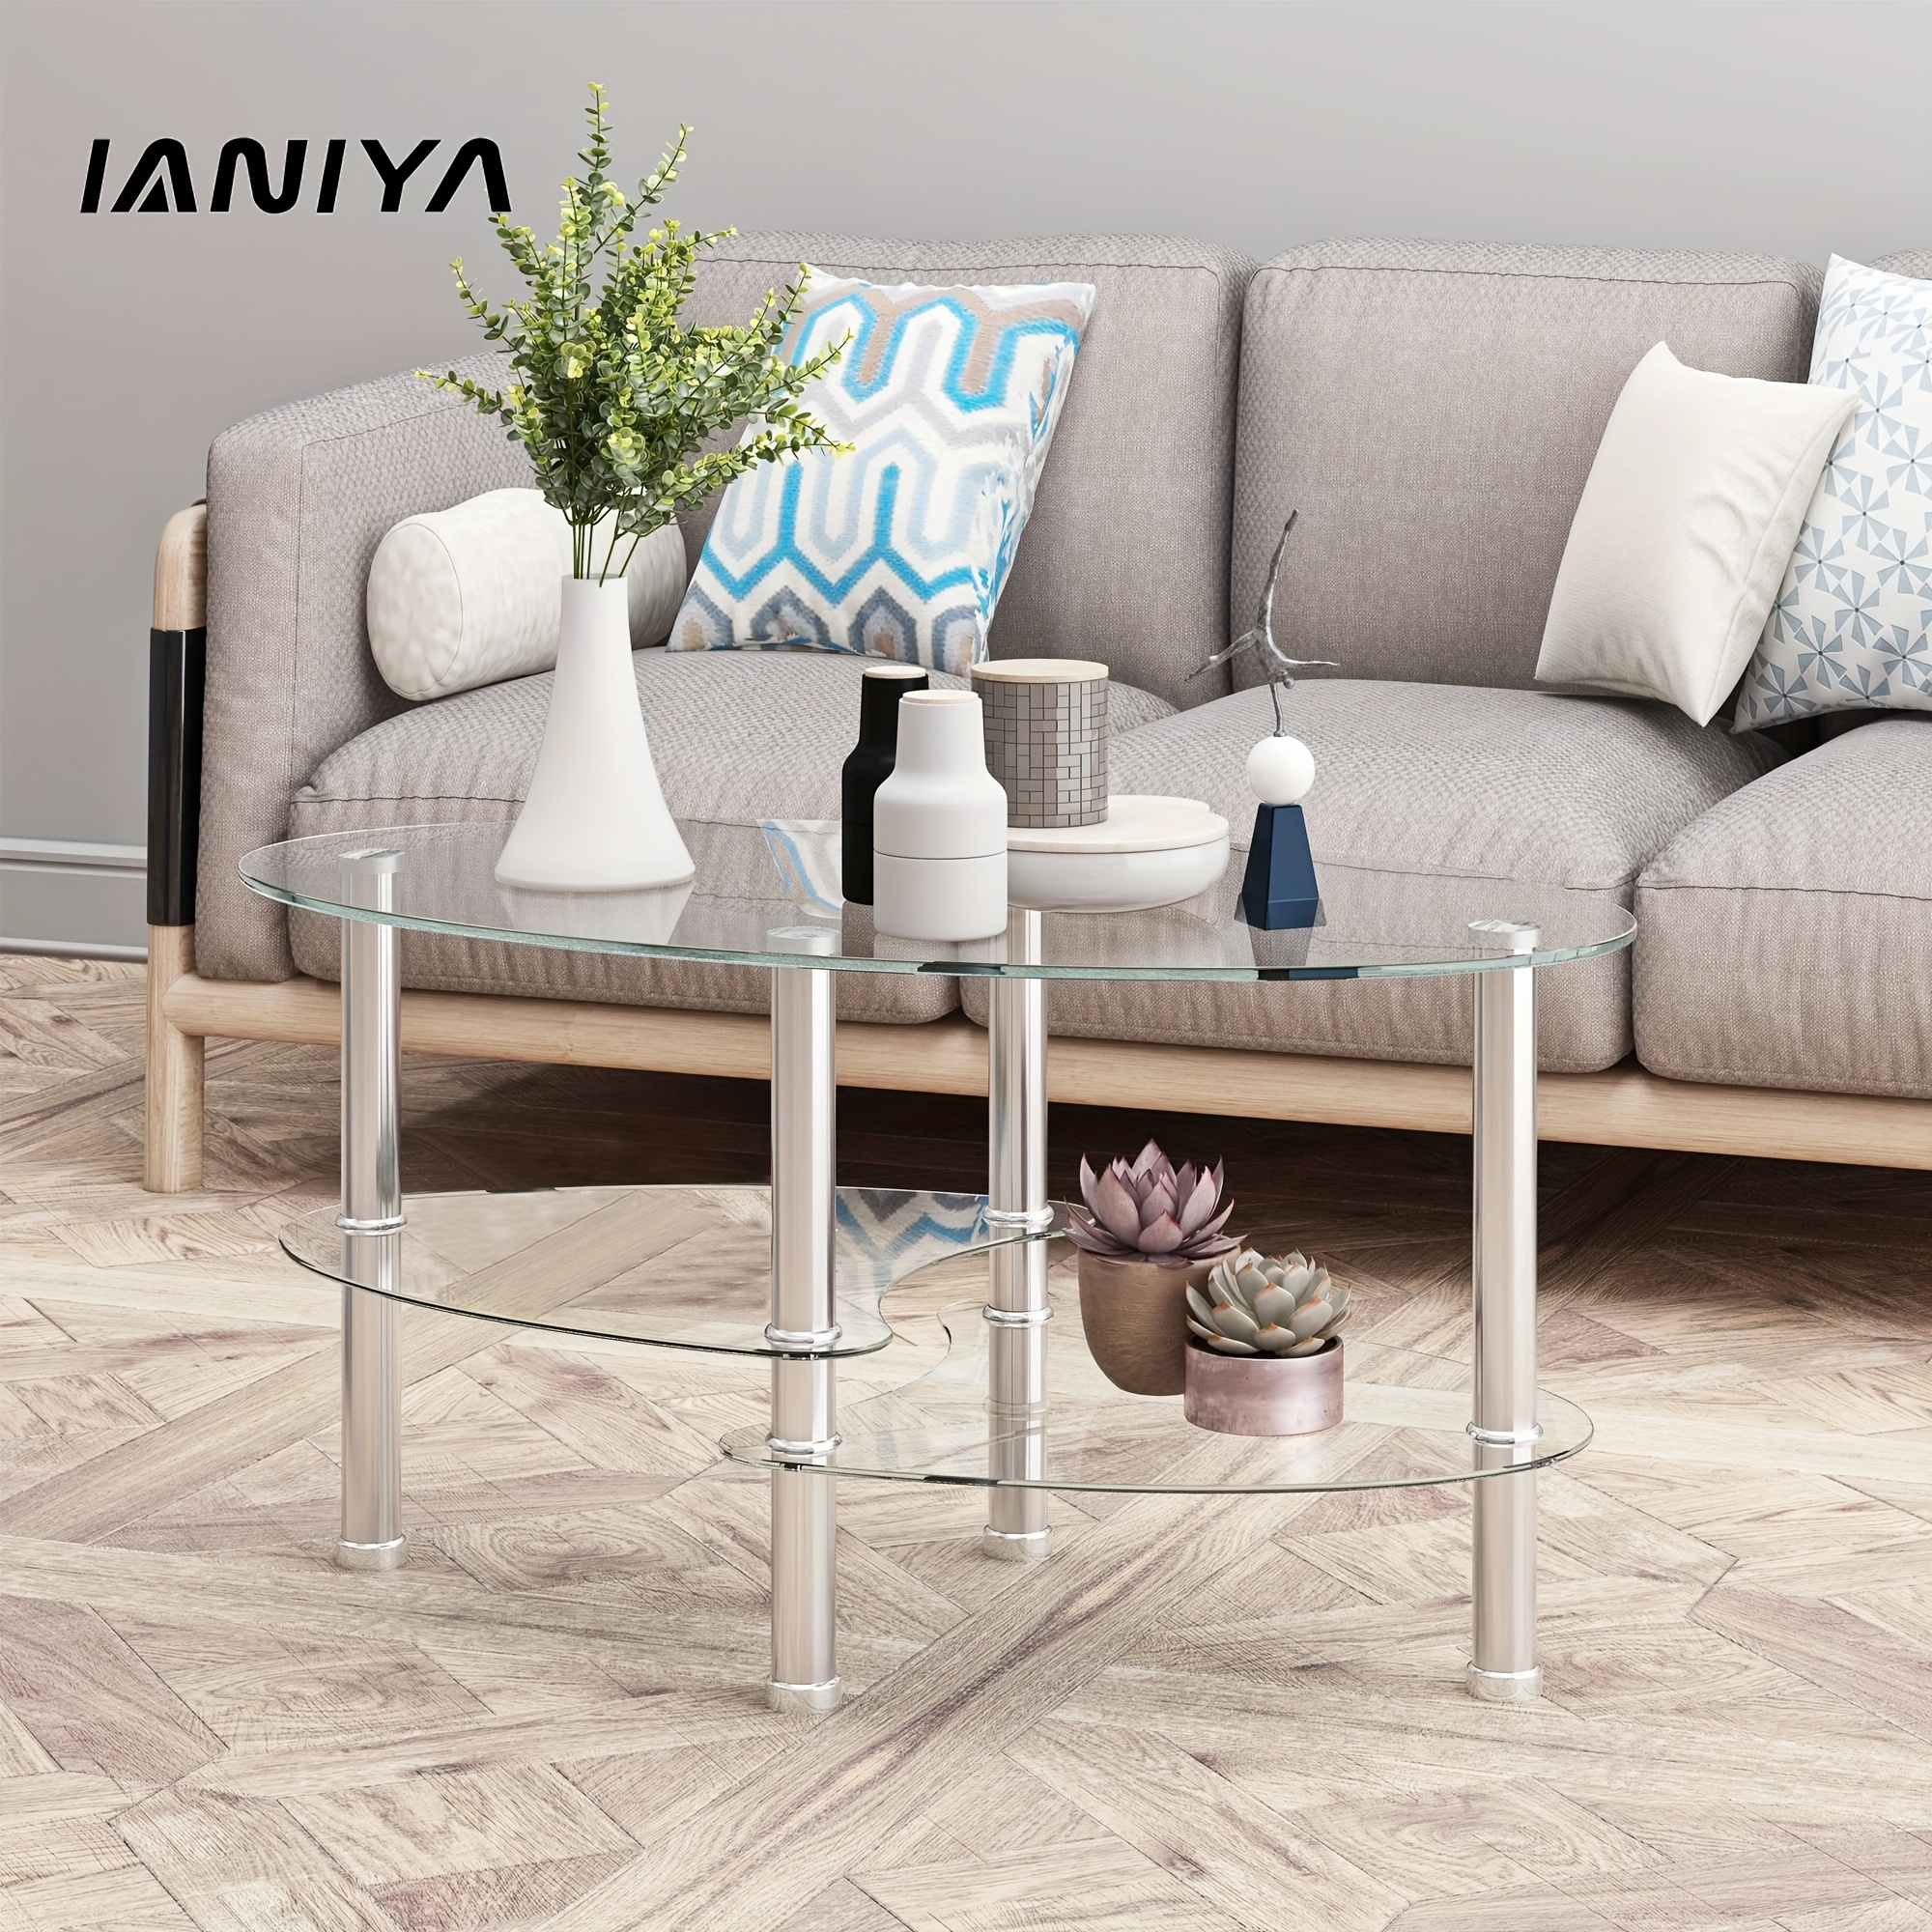 

Transparent Oval Glass Coffee Table, Modern Table With Stainless Steel Leg, Tea Table 3-layer Glass Table For Living Room